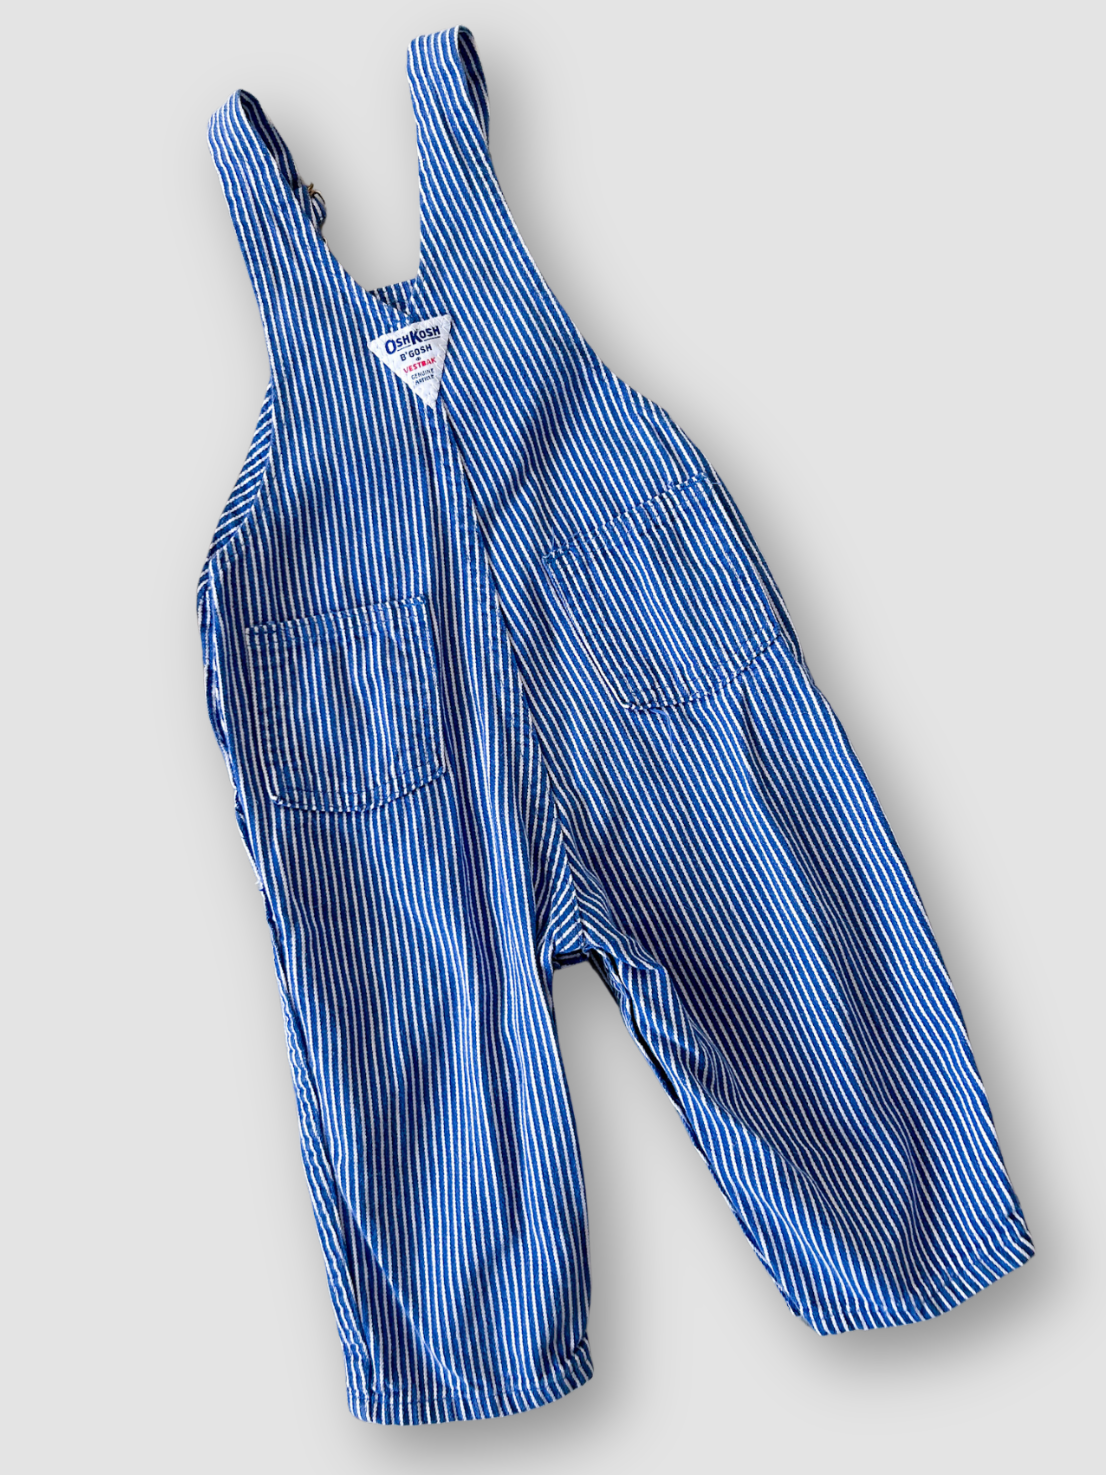 Vintage OshKosh Hickory Stripe Dungarees, approx 12-18 months